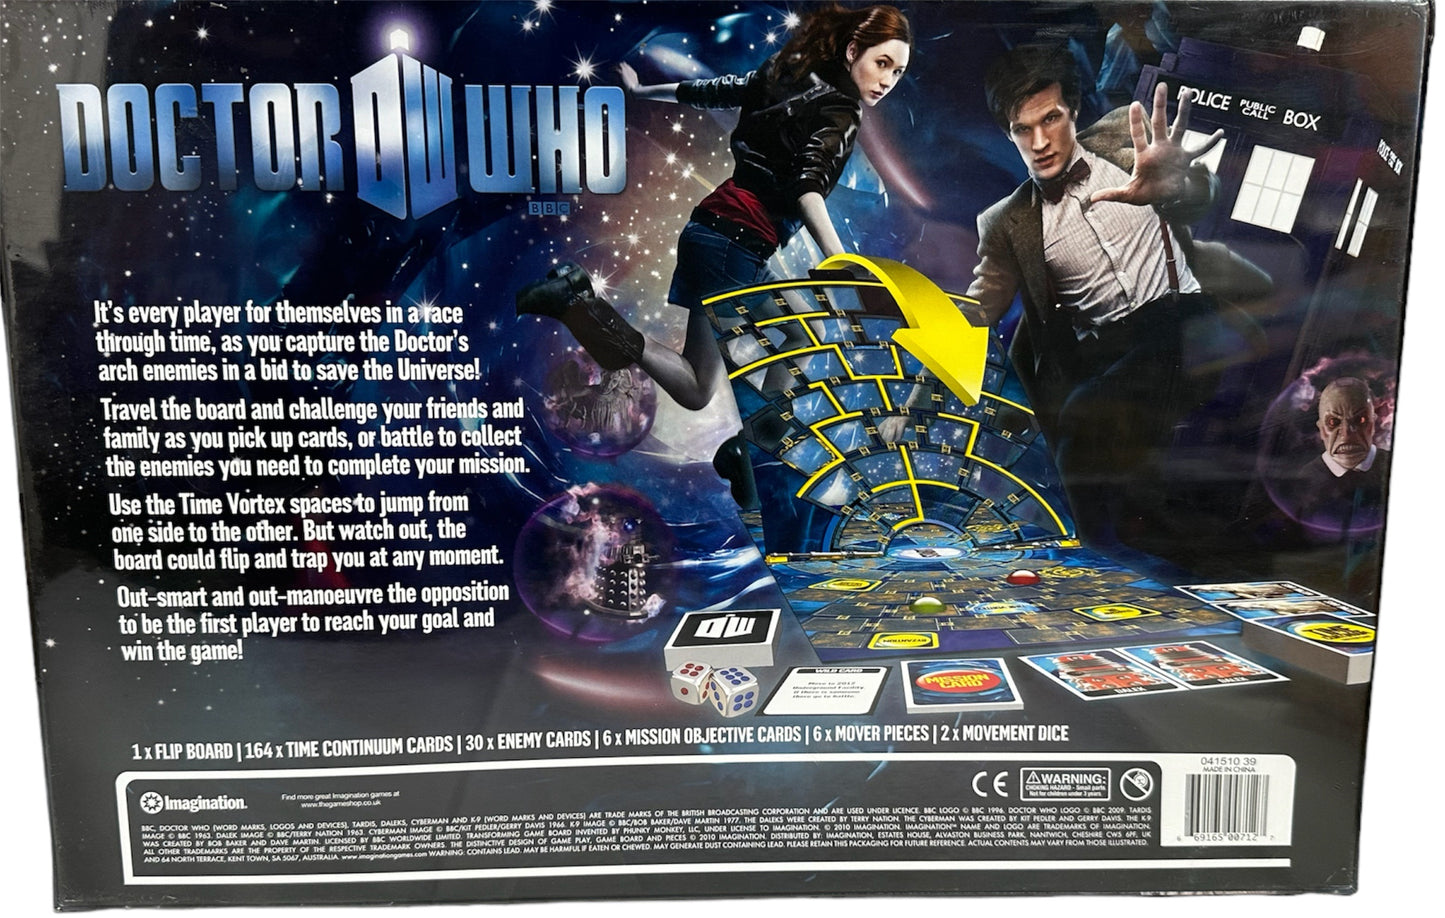 Vintage Imagination 2010 Doctor Dr Who The Time Wars Family Board Game - Factory Sealed Shop Stock Room Find.